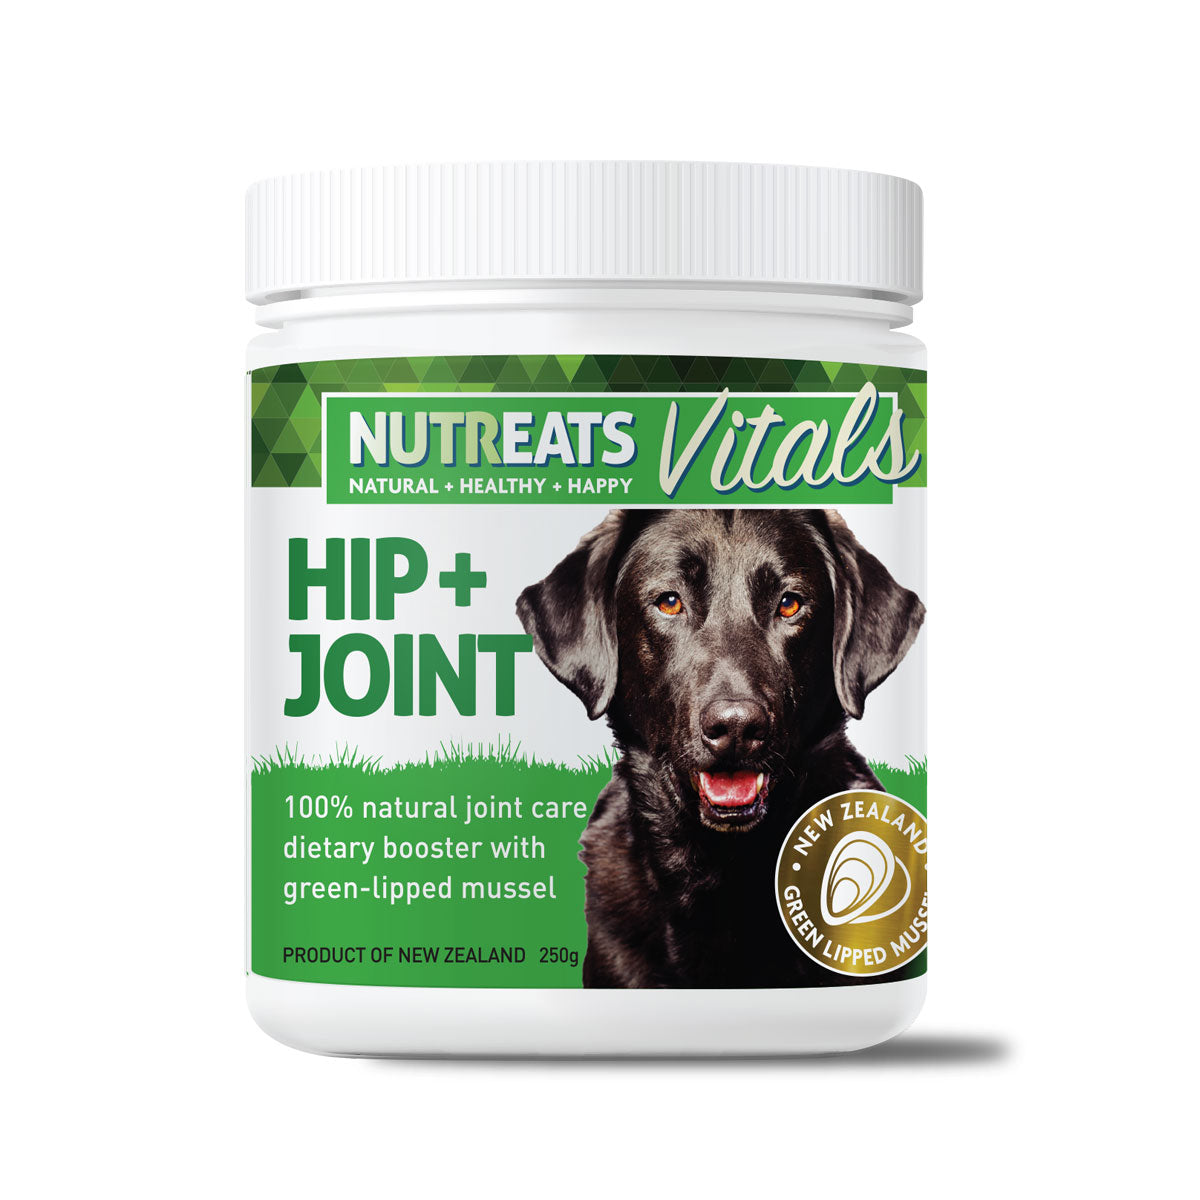 Nutreats Vitals Hip & Joint powder for dogs - supporting naturally healthy hips and joints in dogs. Rich in Omega 3 and a rich source of chondroitin. totally natural feed supplement for dogs supporting healthy hips and joints.